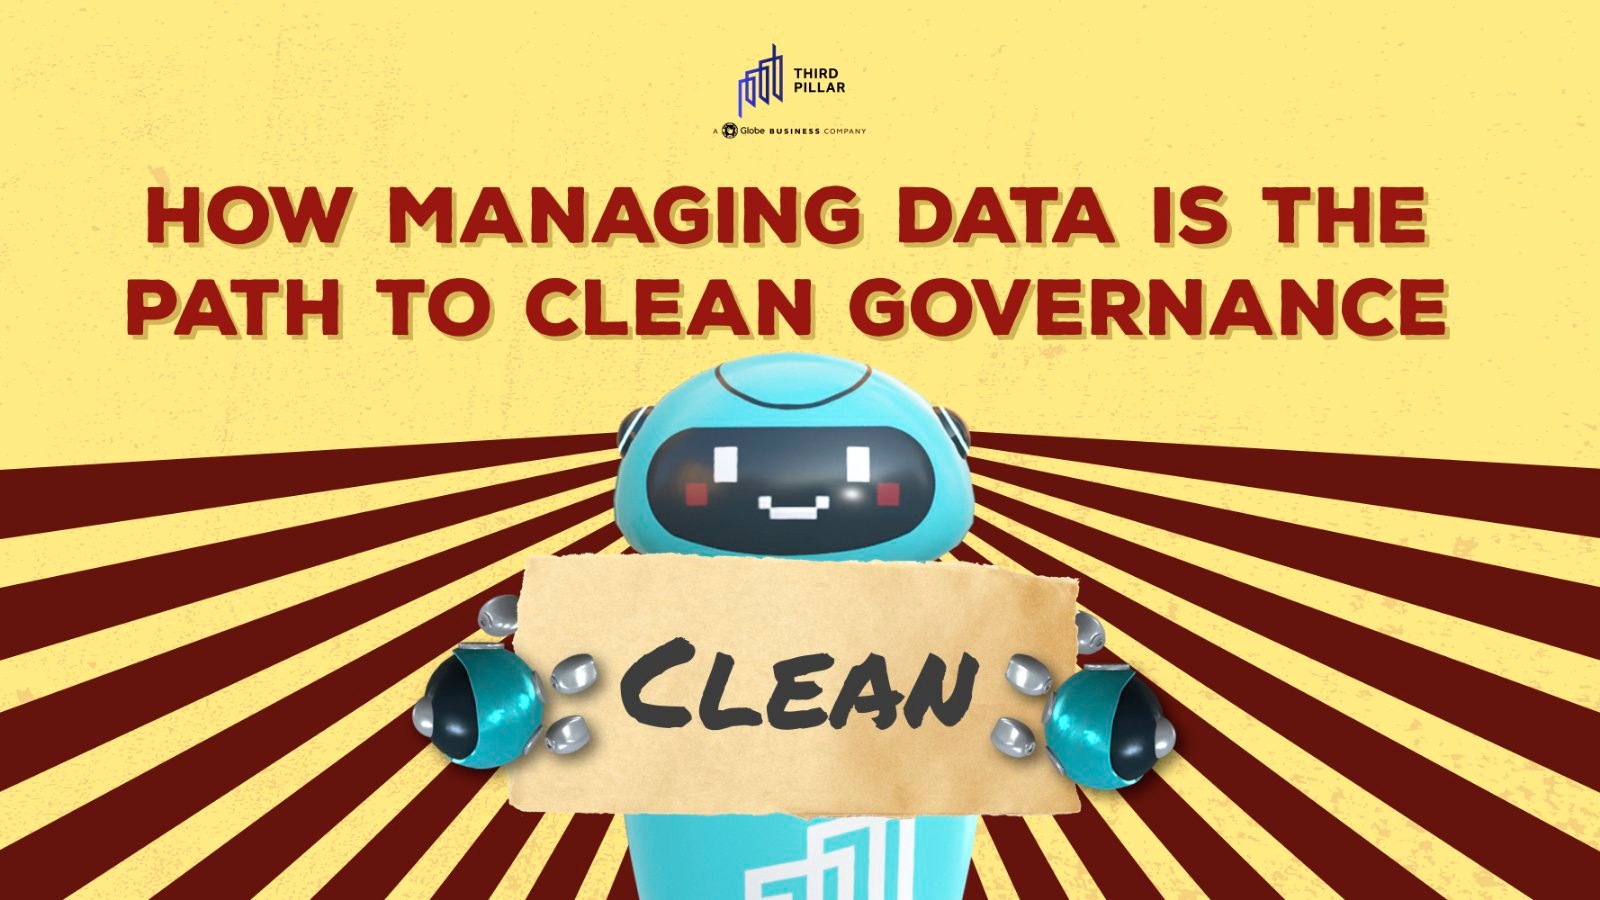 How managing data is the path to clean governance